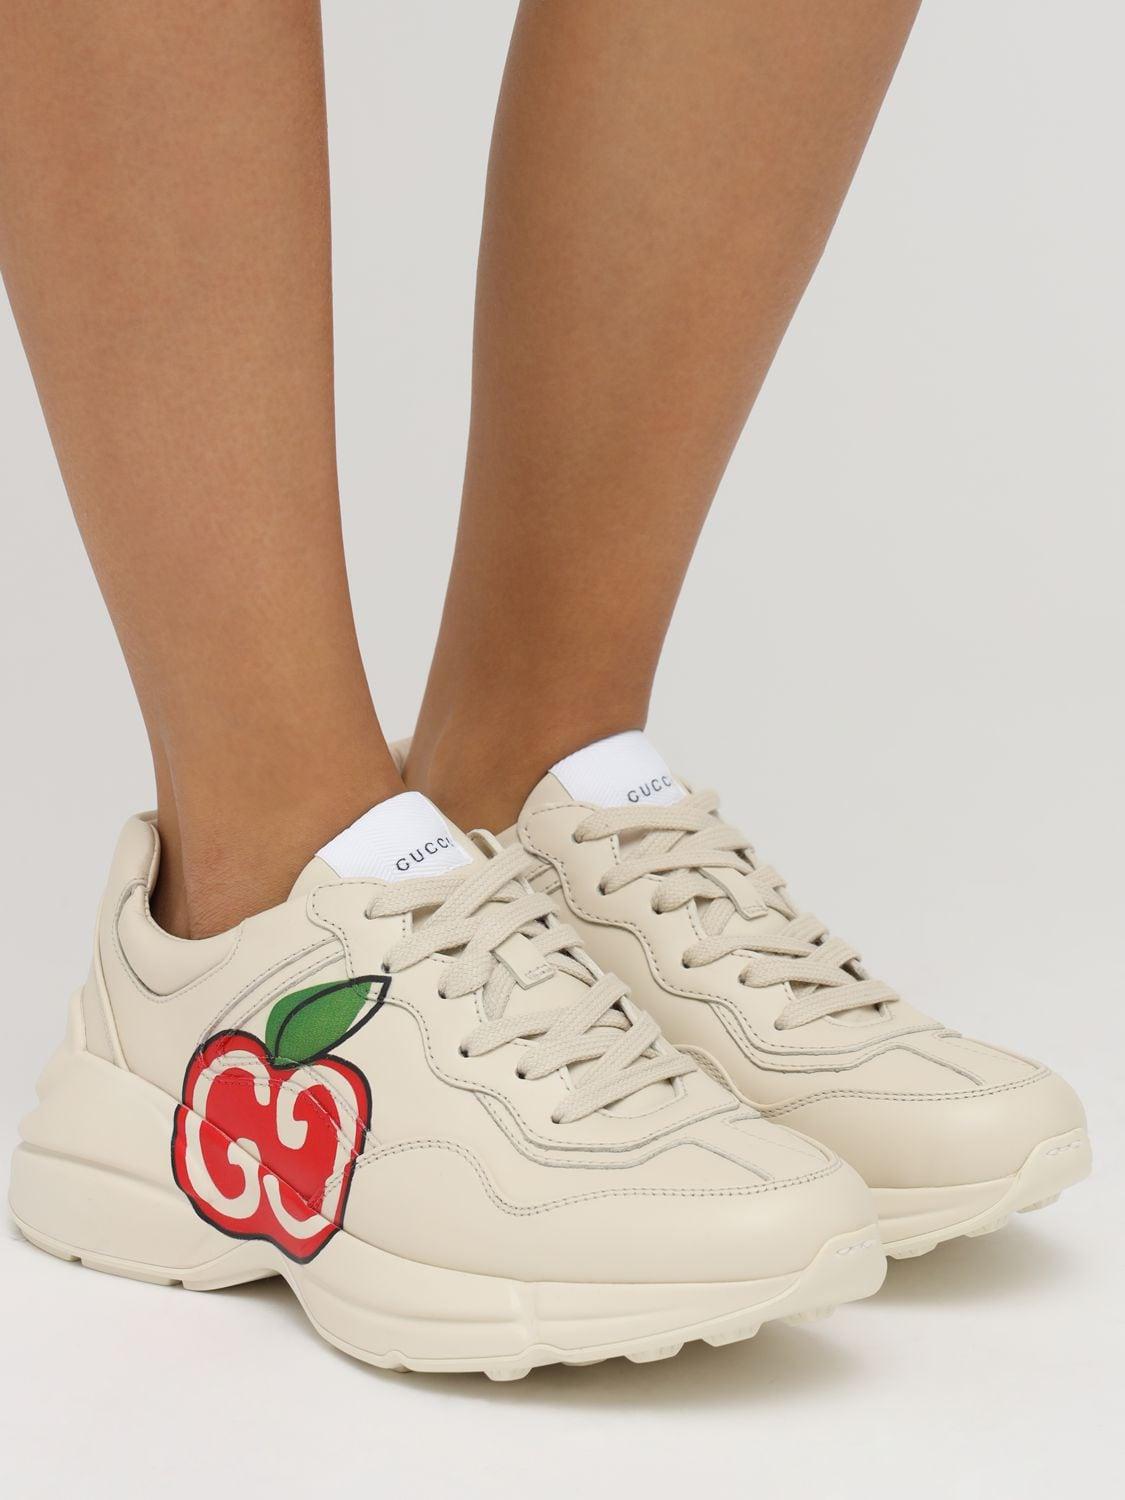 Gucci Rhyton Apple Sneakers in White | Lyst